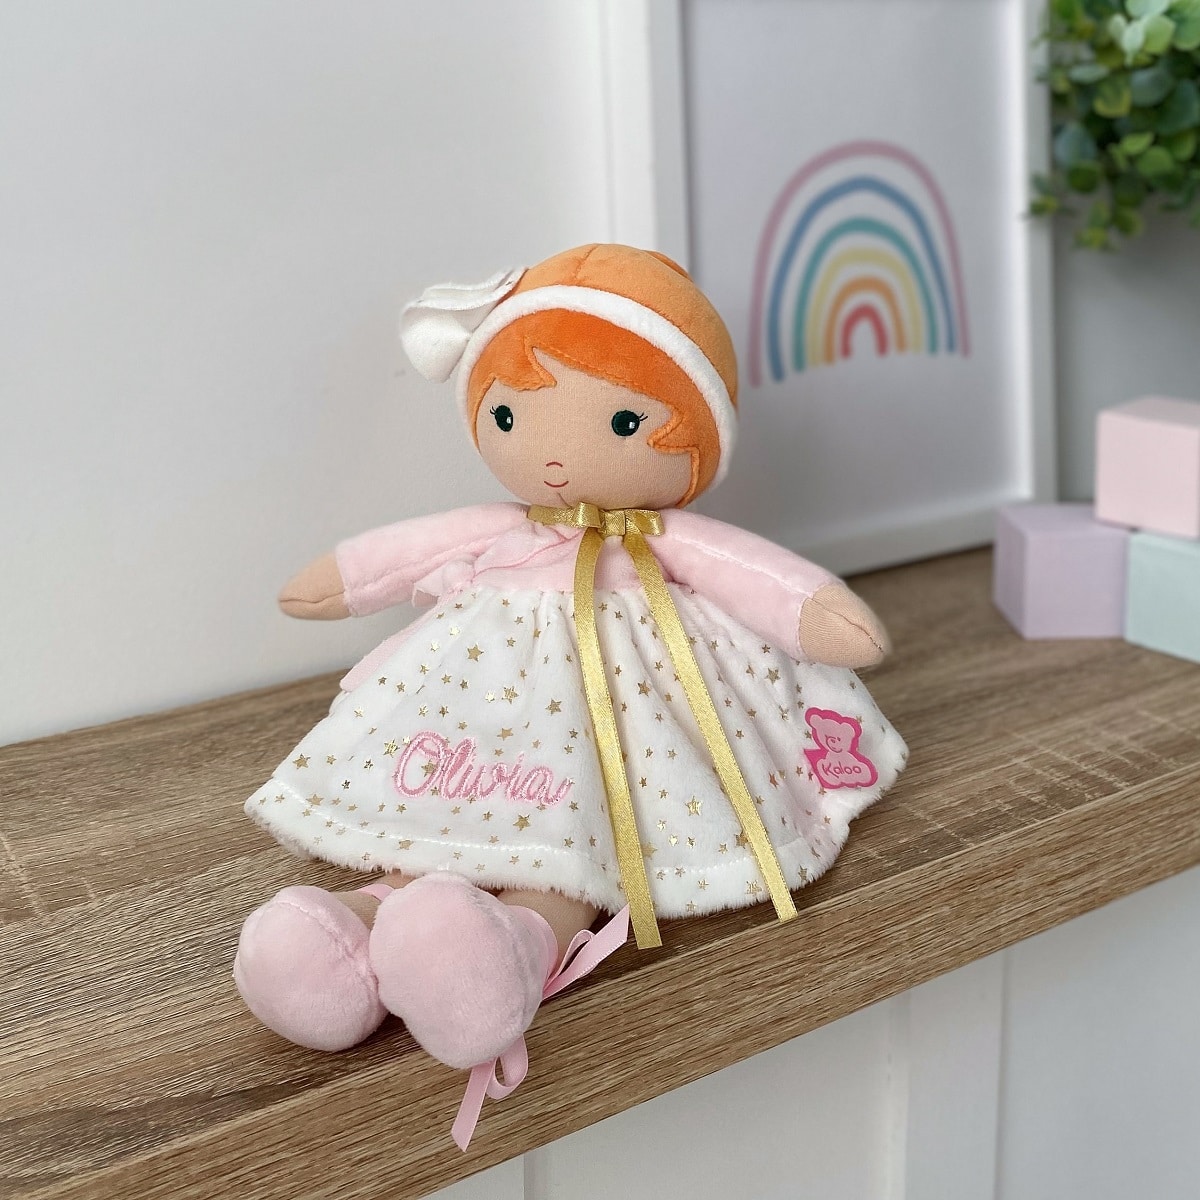 Personalised Kaloo Valentine K my first doll soft toy